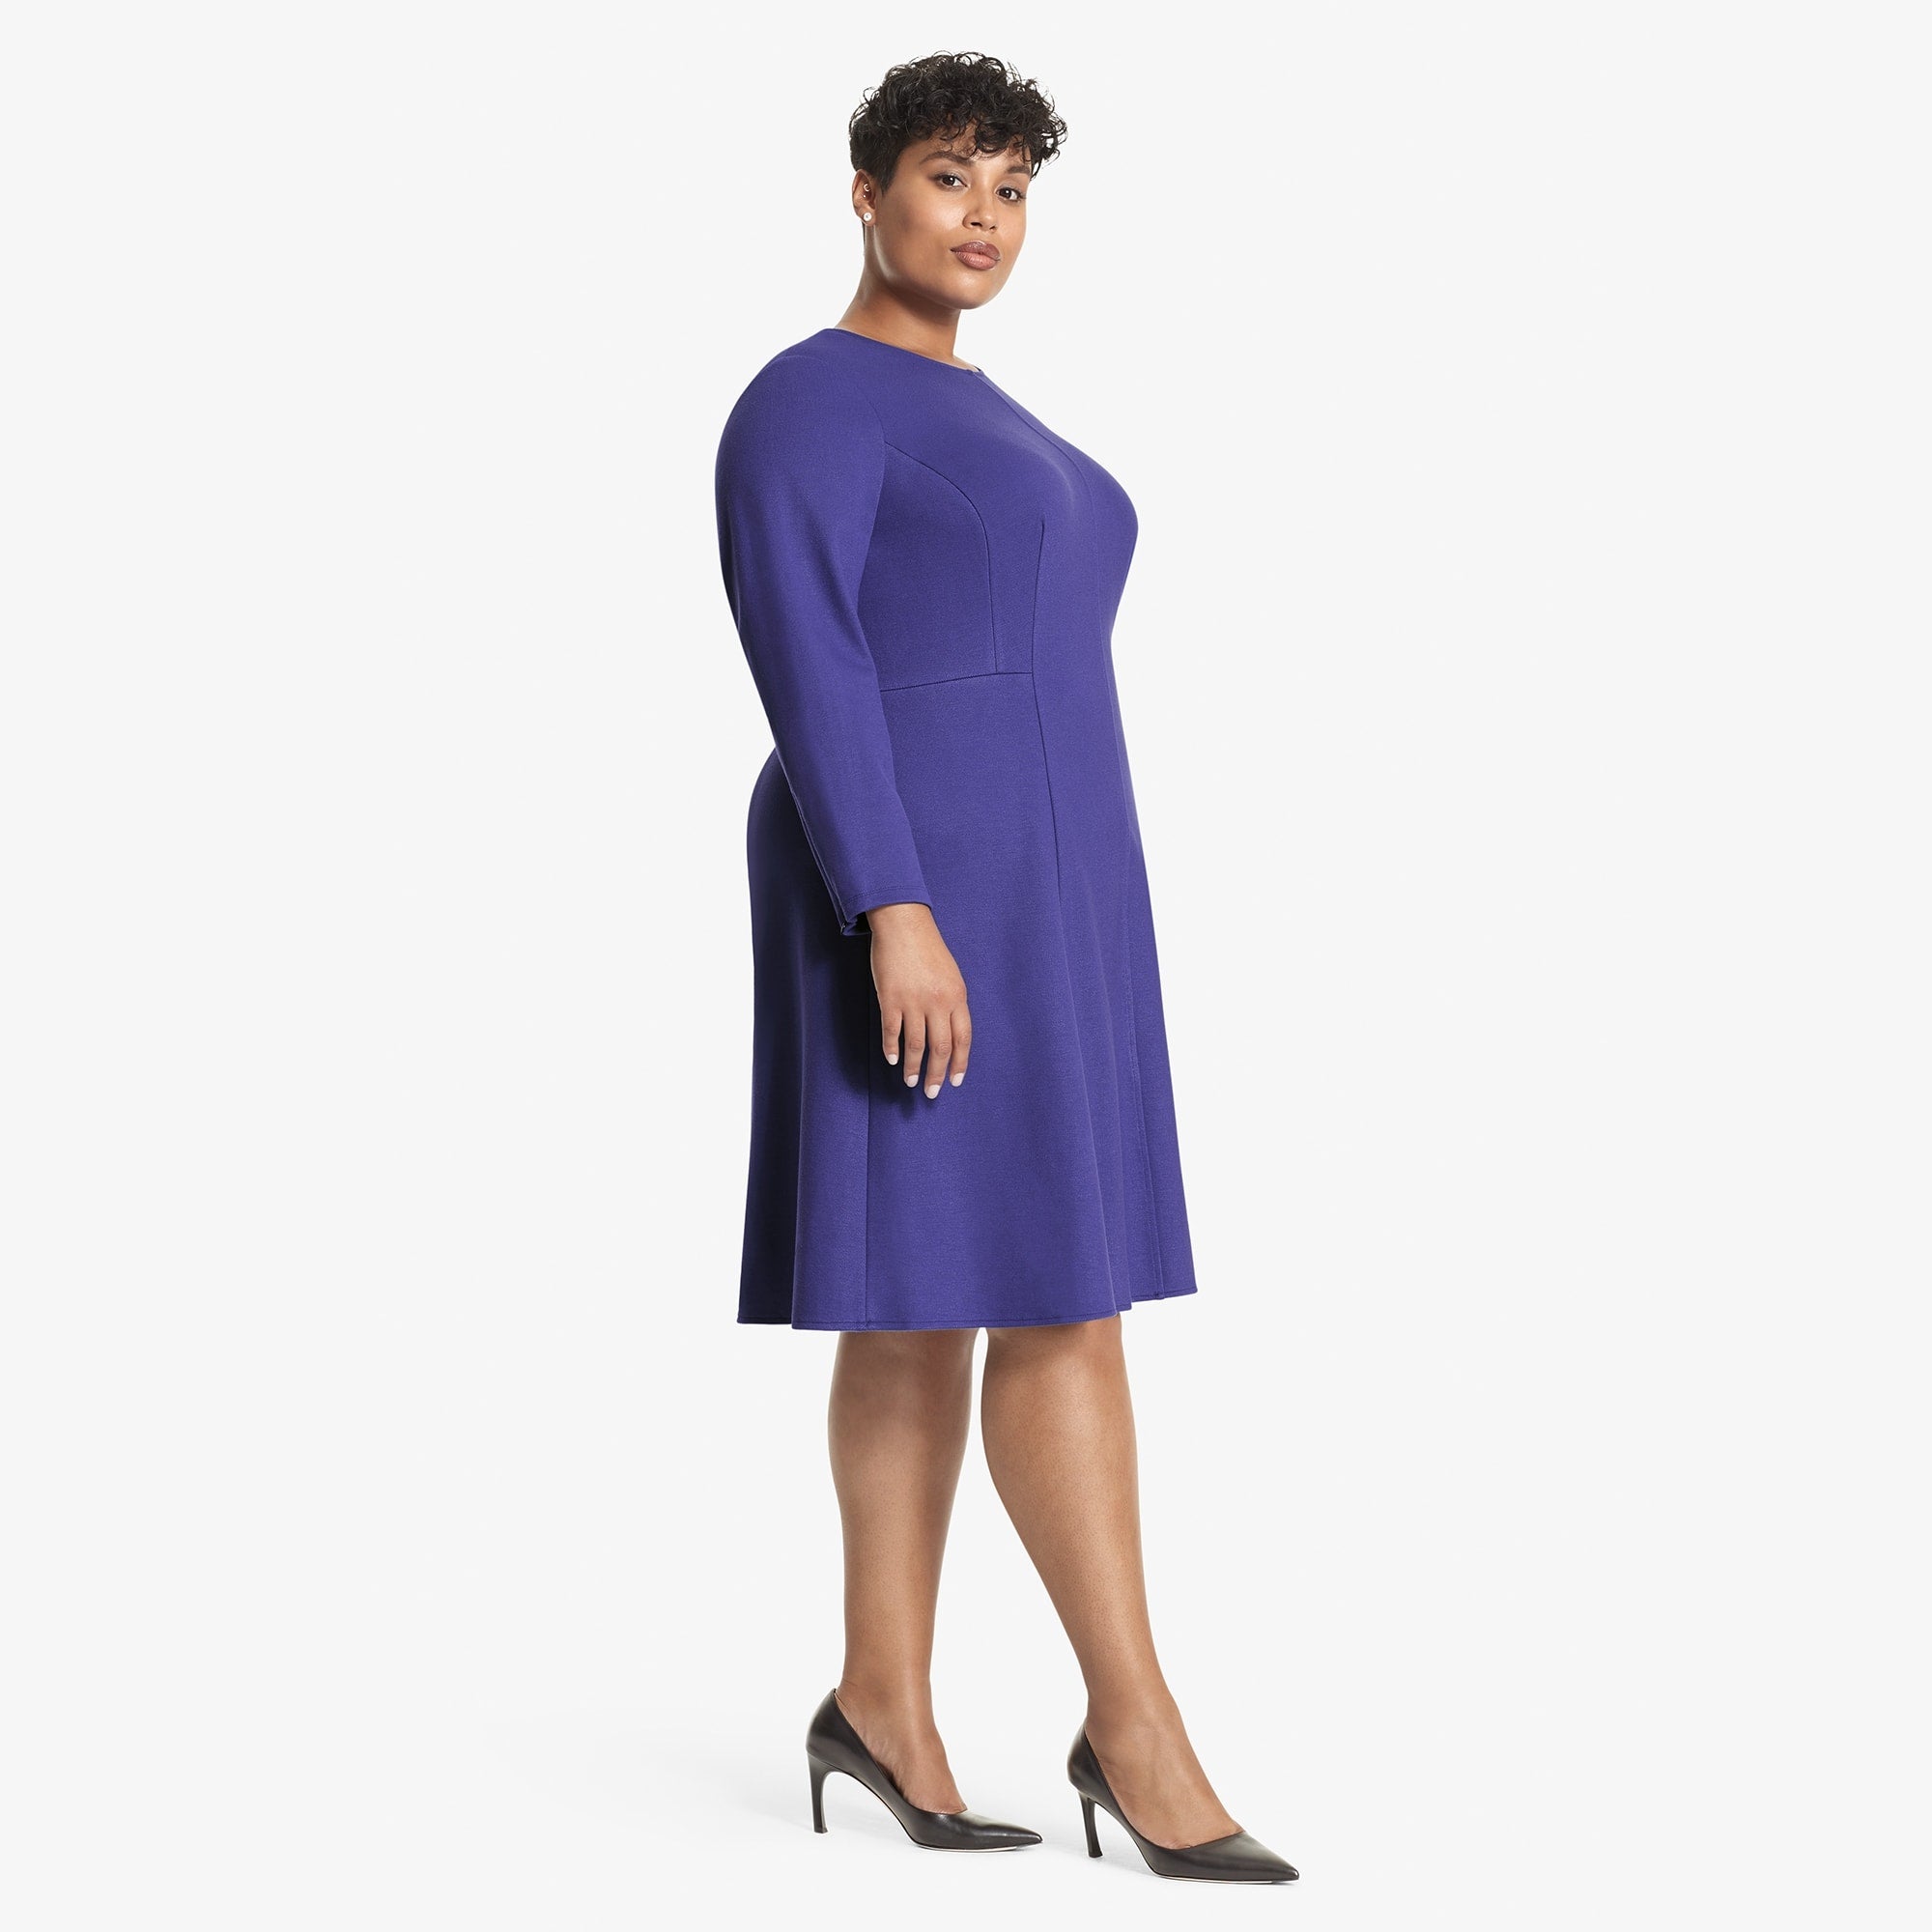 Side image of a woman standing wearing the Ellis dress textured ponte in Violet